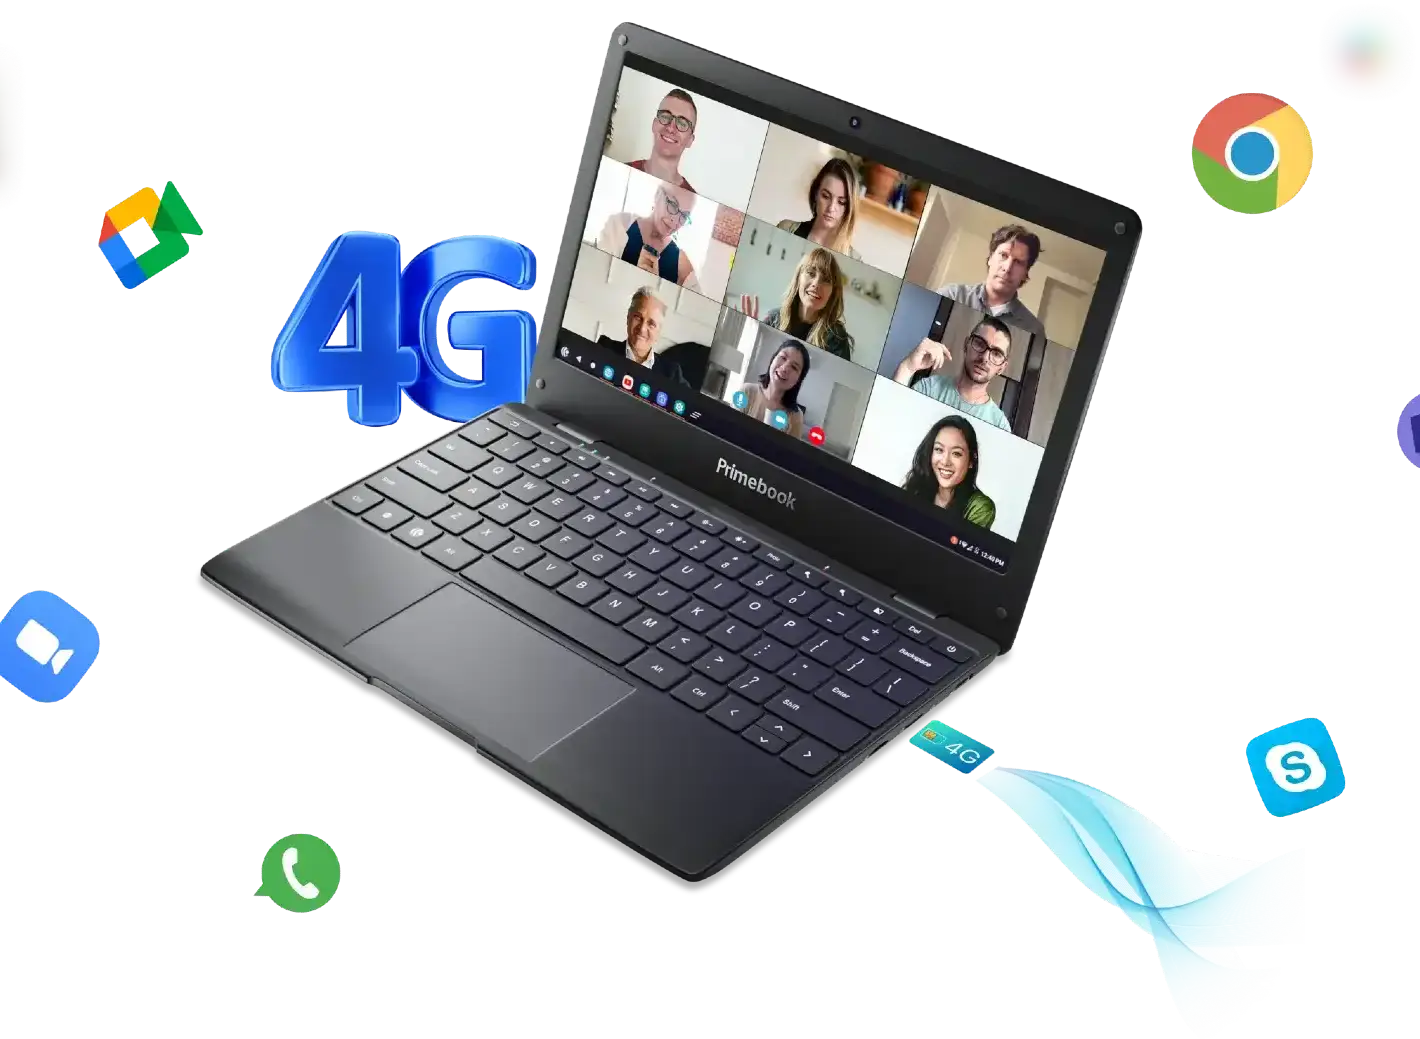 Nine people videocalling via zoom on primebook laptop and 4g, google chrome, microsoft team, google meet, whatsapp and 4 4g sim are displaying in the screen